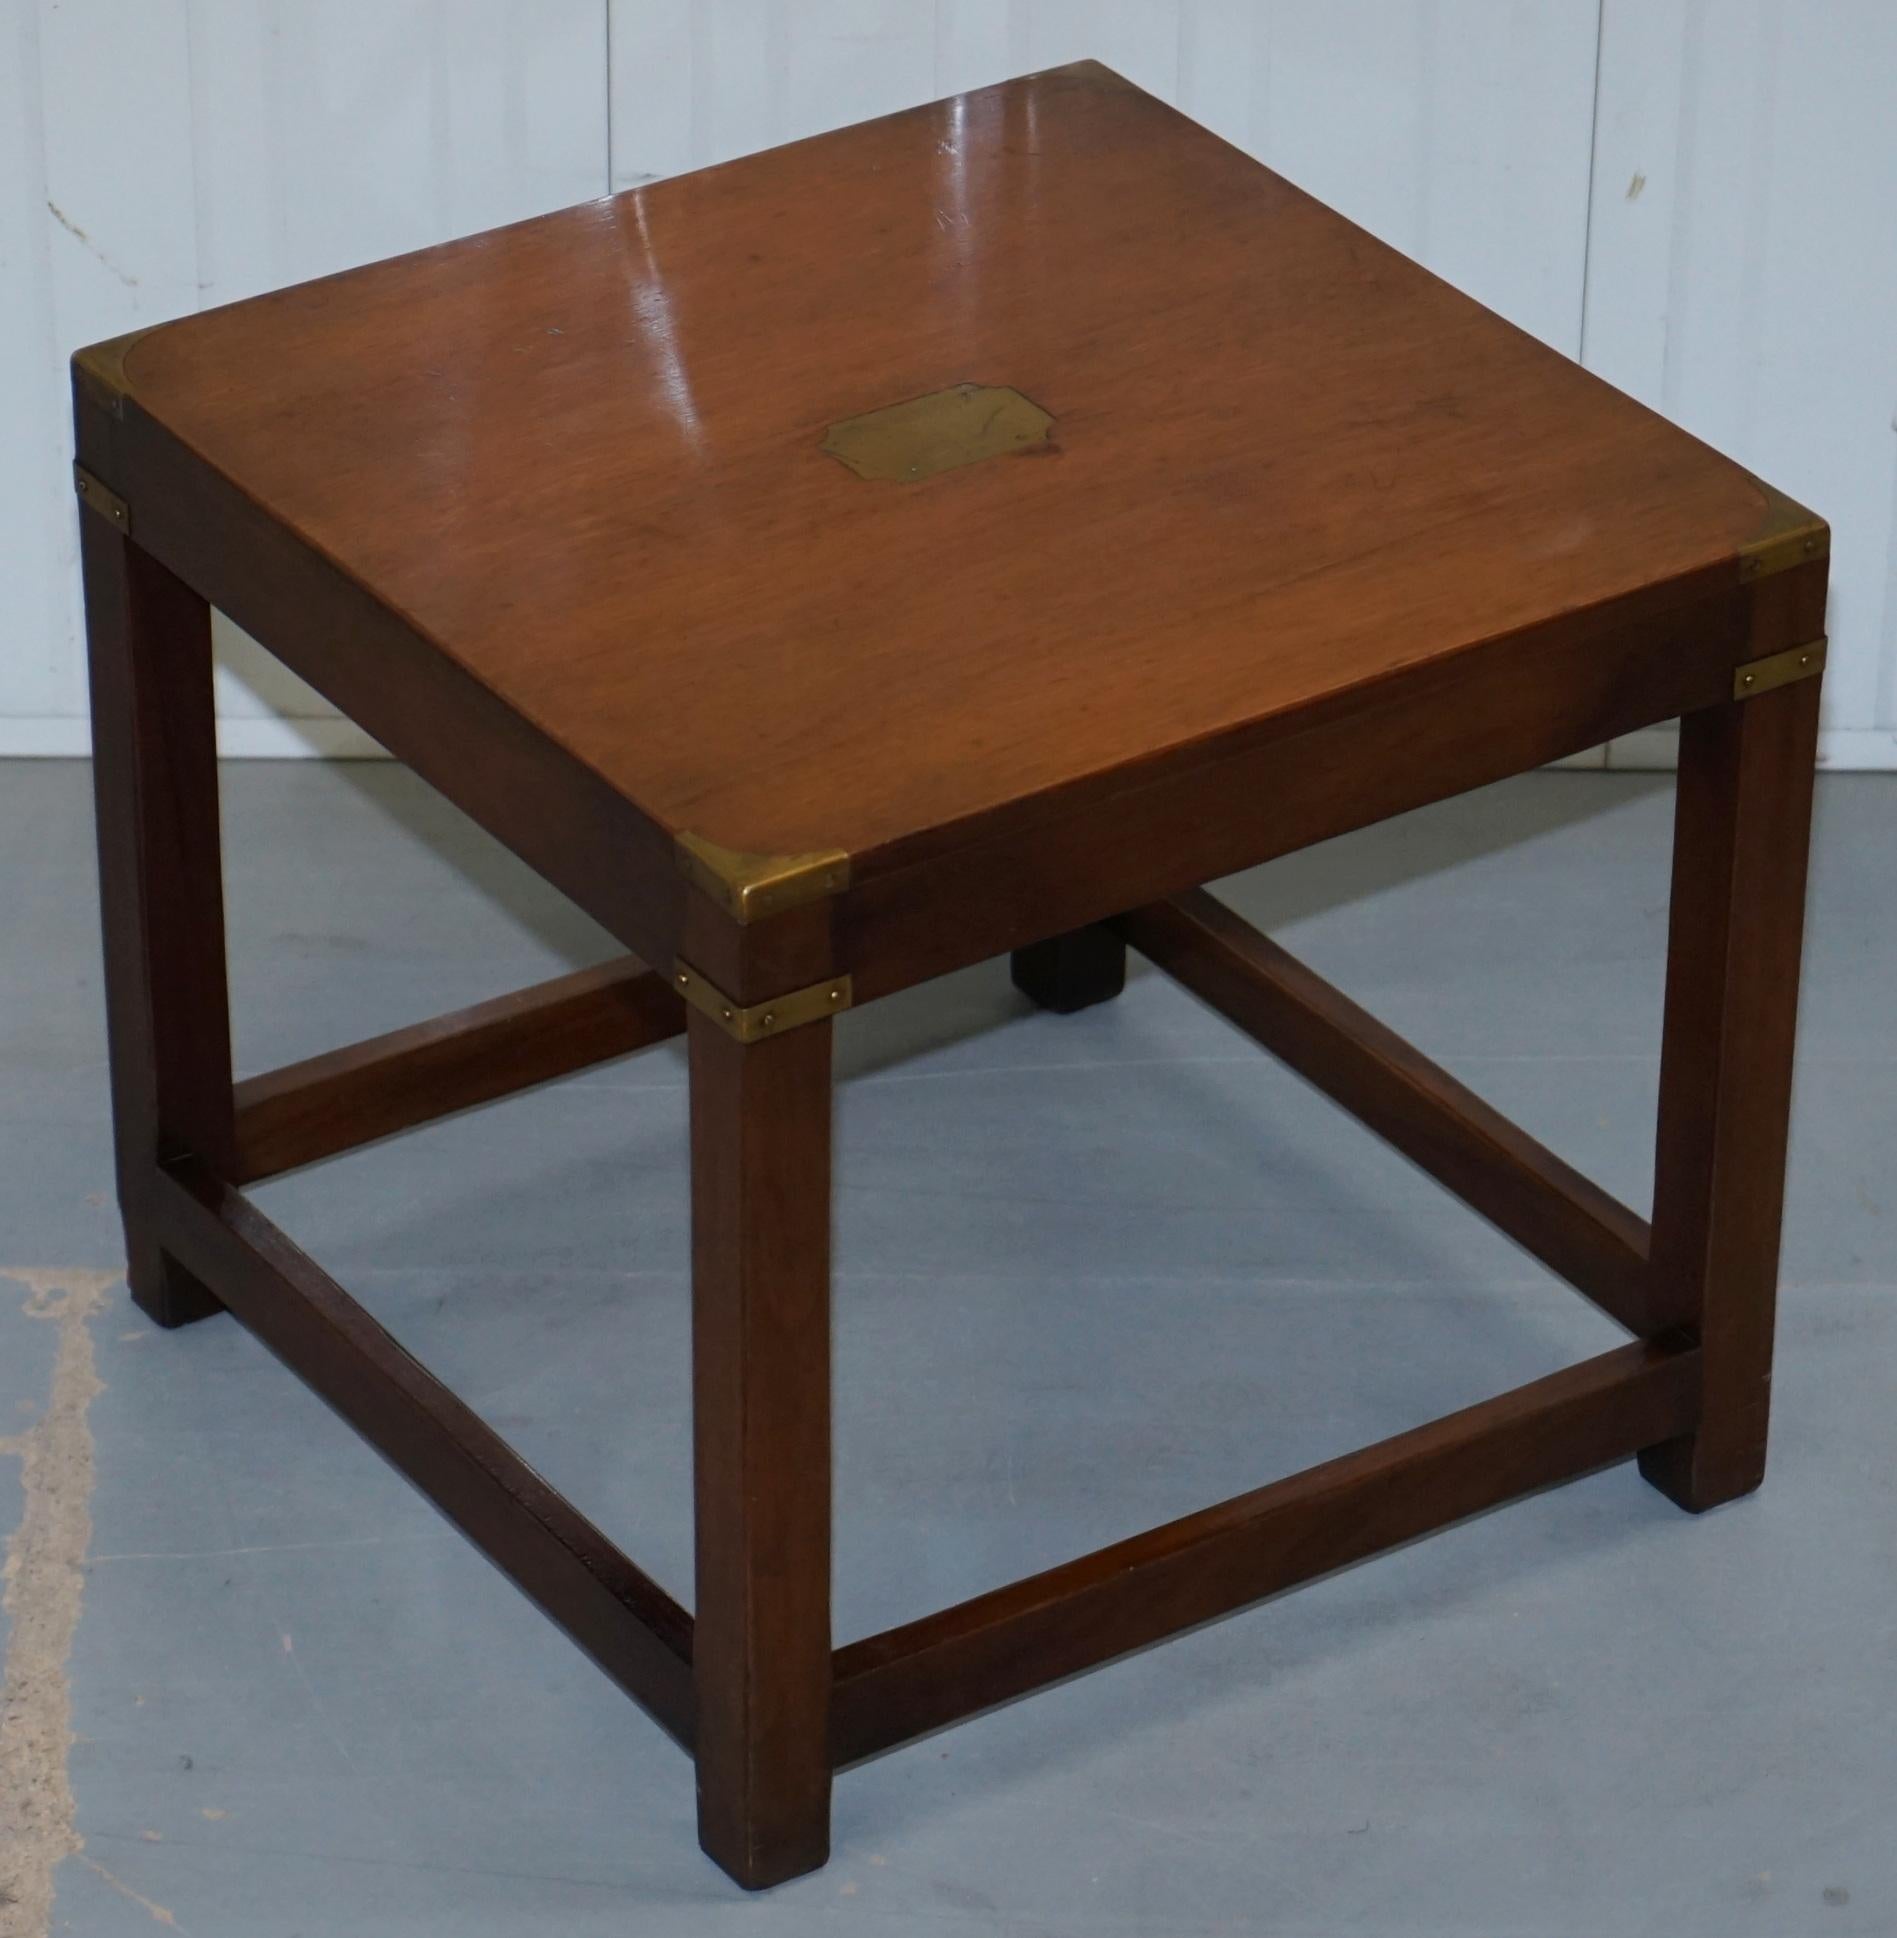 We are delighted to offer for sale this stunning Harrods London mahogany military campaign coffee or side table with brass fittings made by Kennedy furniture RRP £1250

This table is in vintage condition, it was purchased from Harrods London and